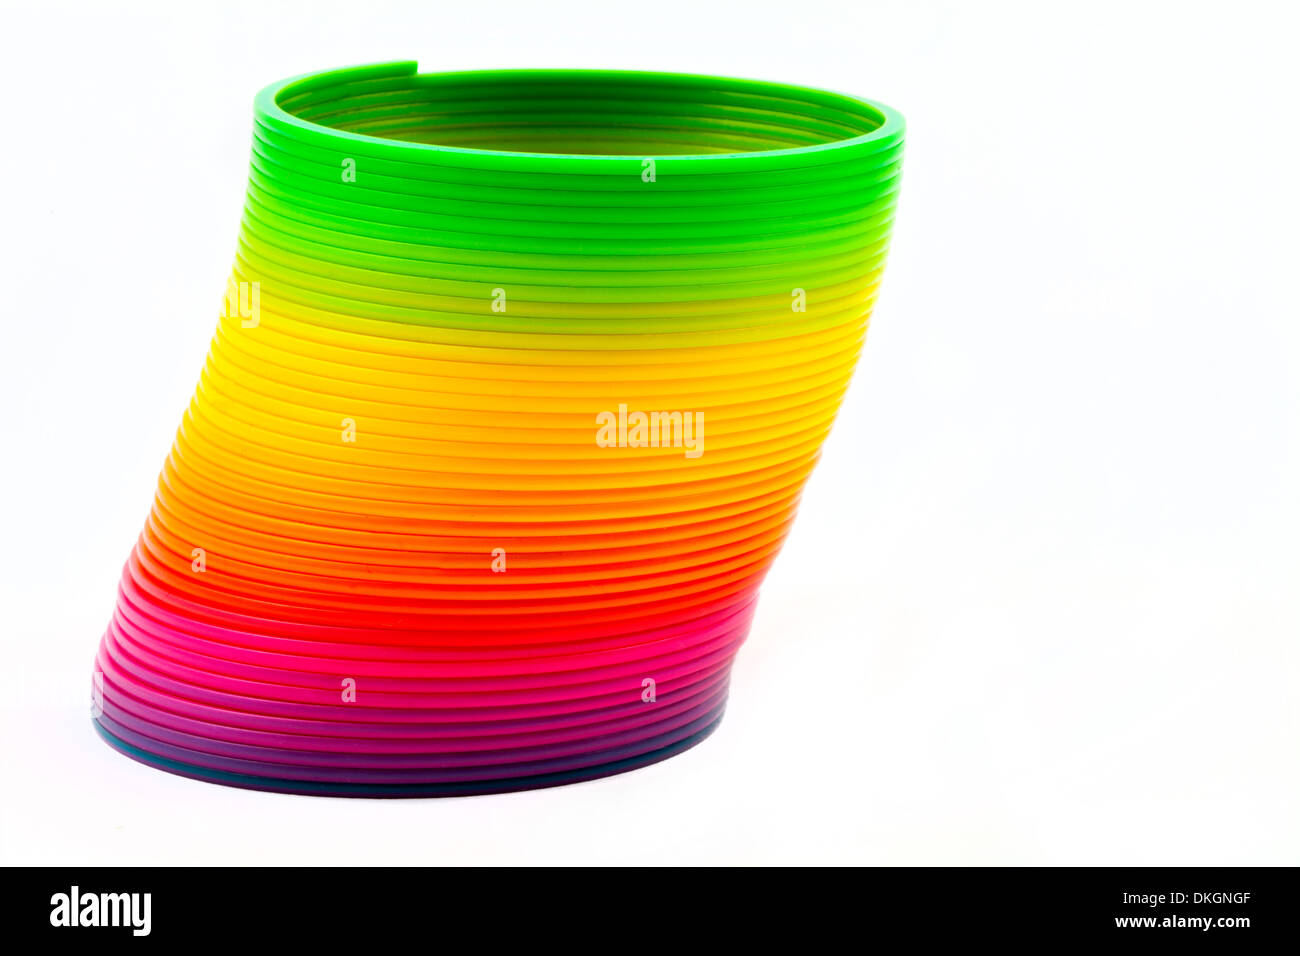 Slinky Toy isolated over a plain white background. Stock Photo